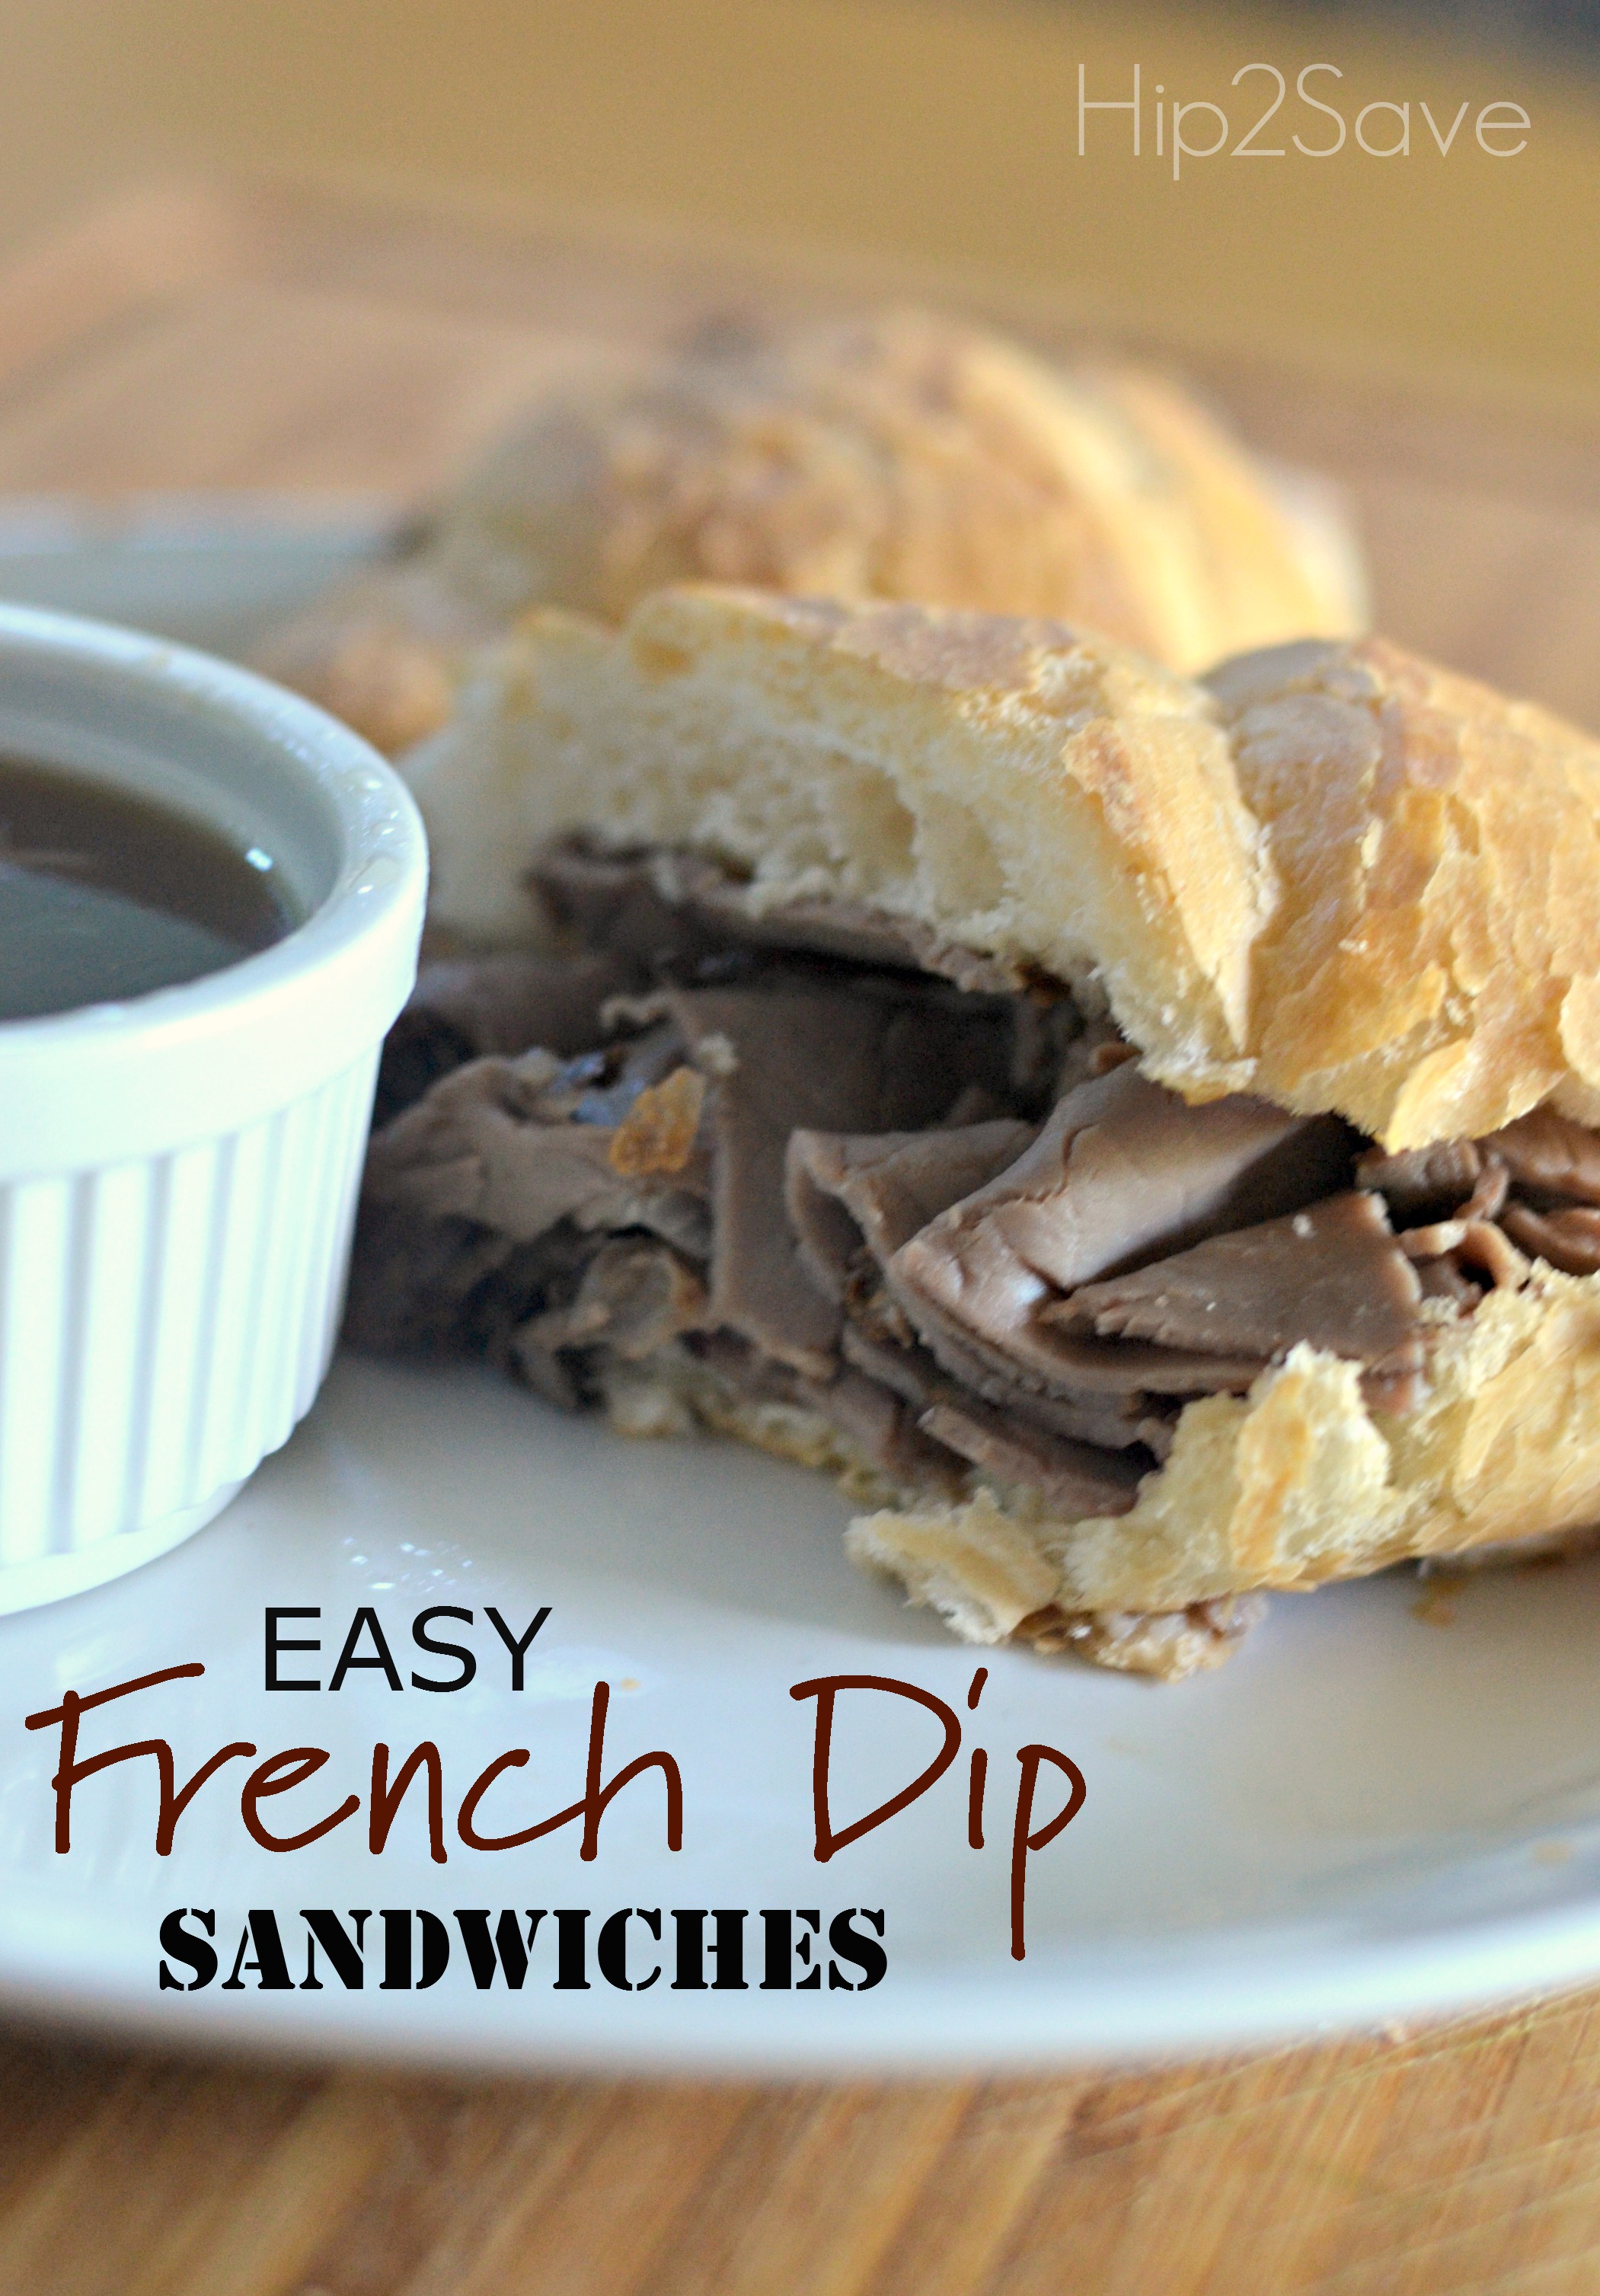 Easy French Dip Sandwiches | Hip2Save